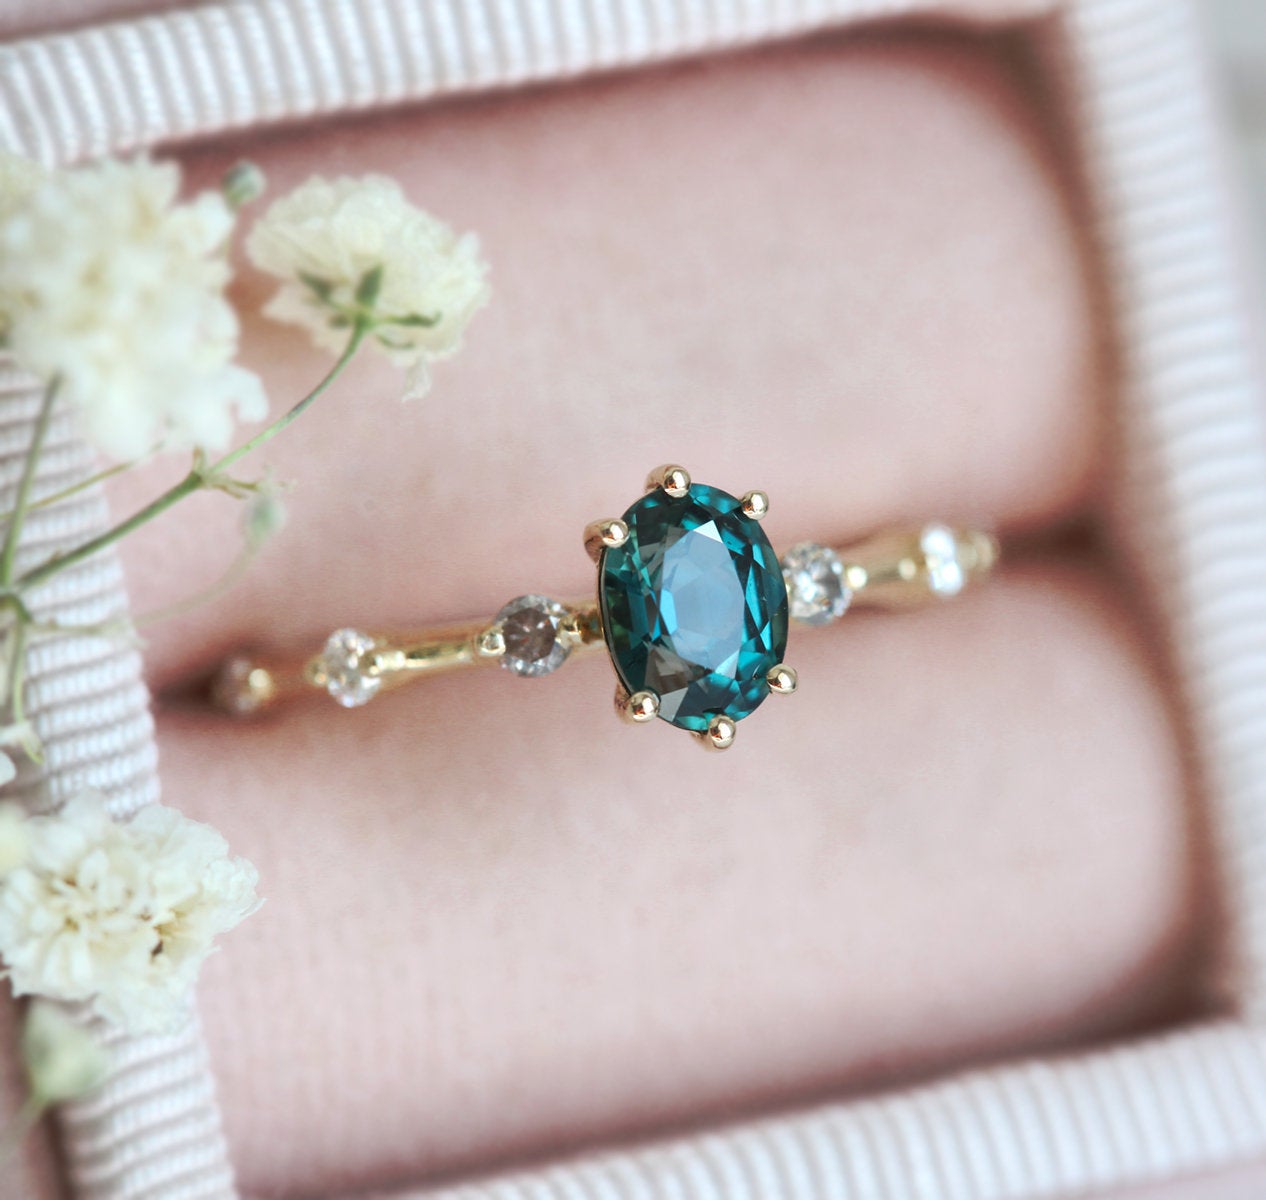 Oval-shaped teal sapphire ring with salt and pepper diamond pave